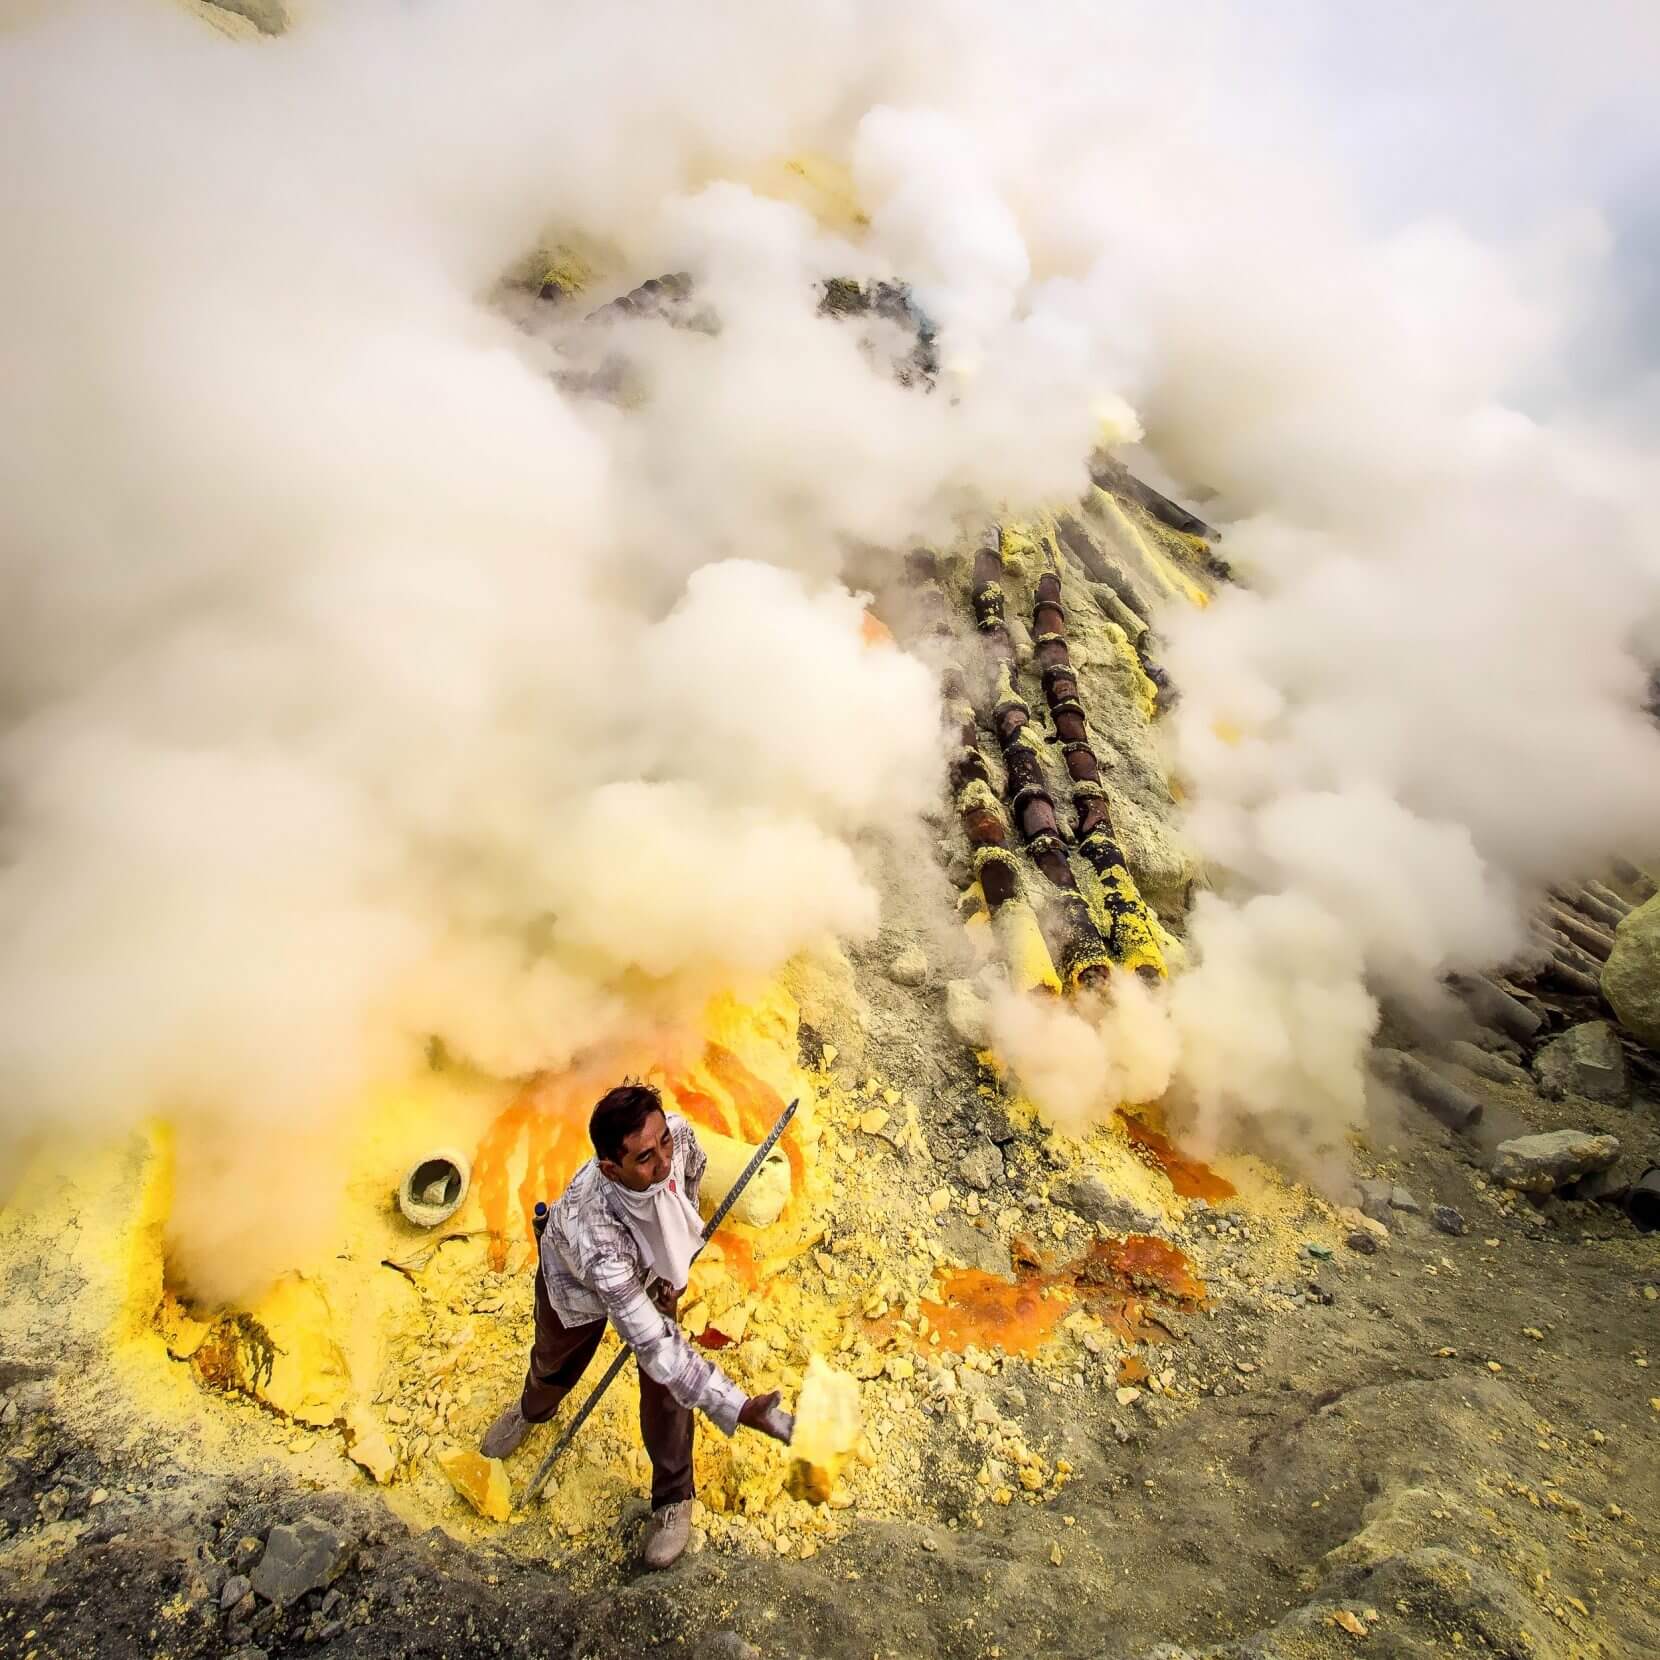 E9R636 Sulfur miner collecting sulfur at Kawah Ijen volcano in East Java, Indonesia.